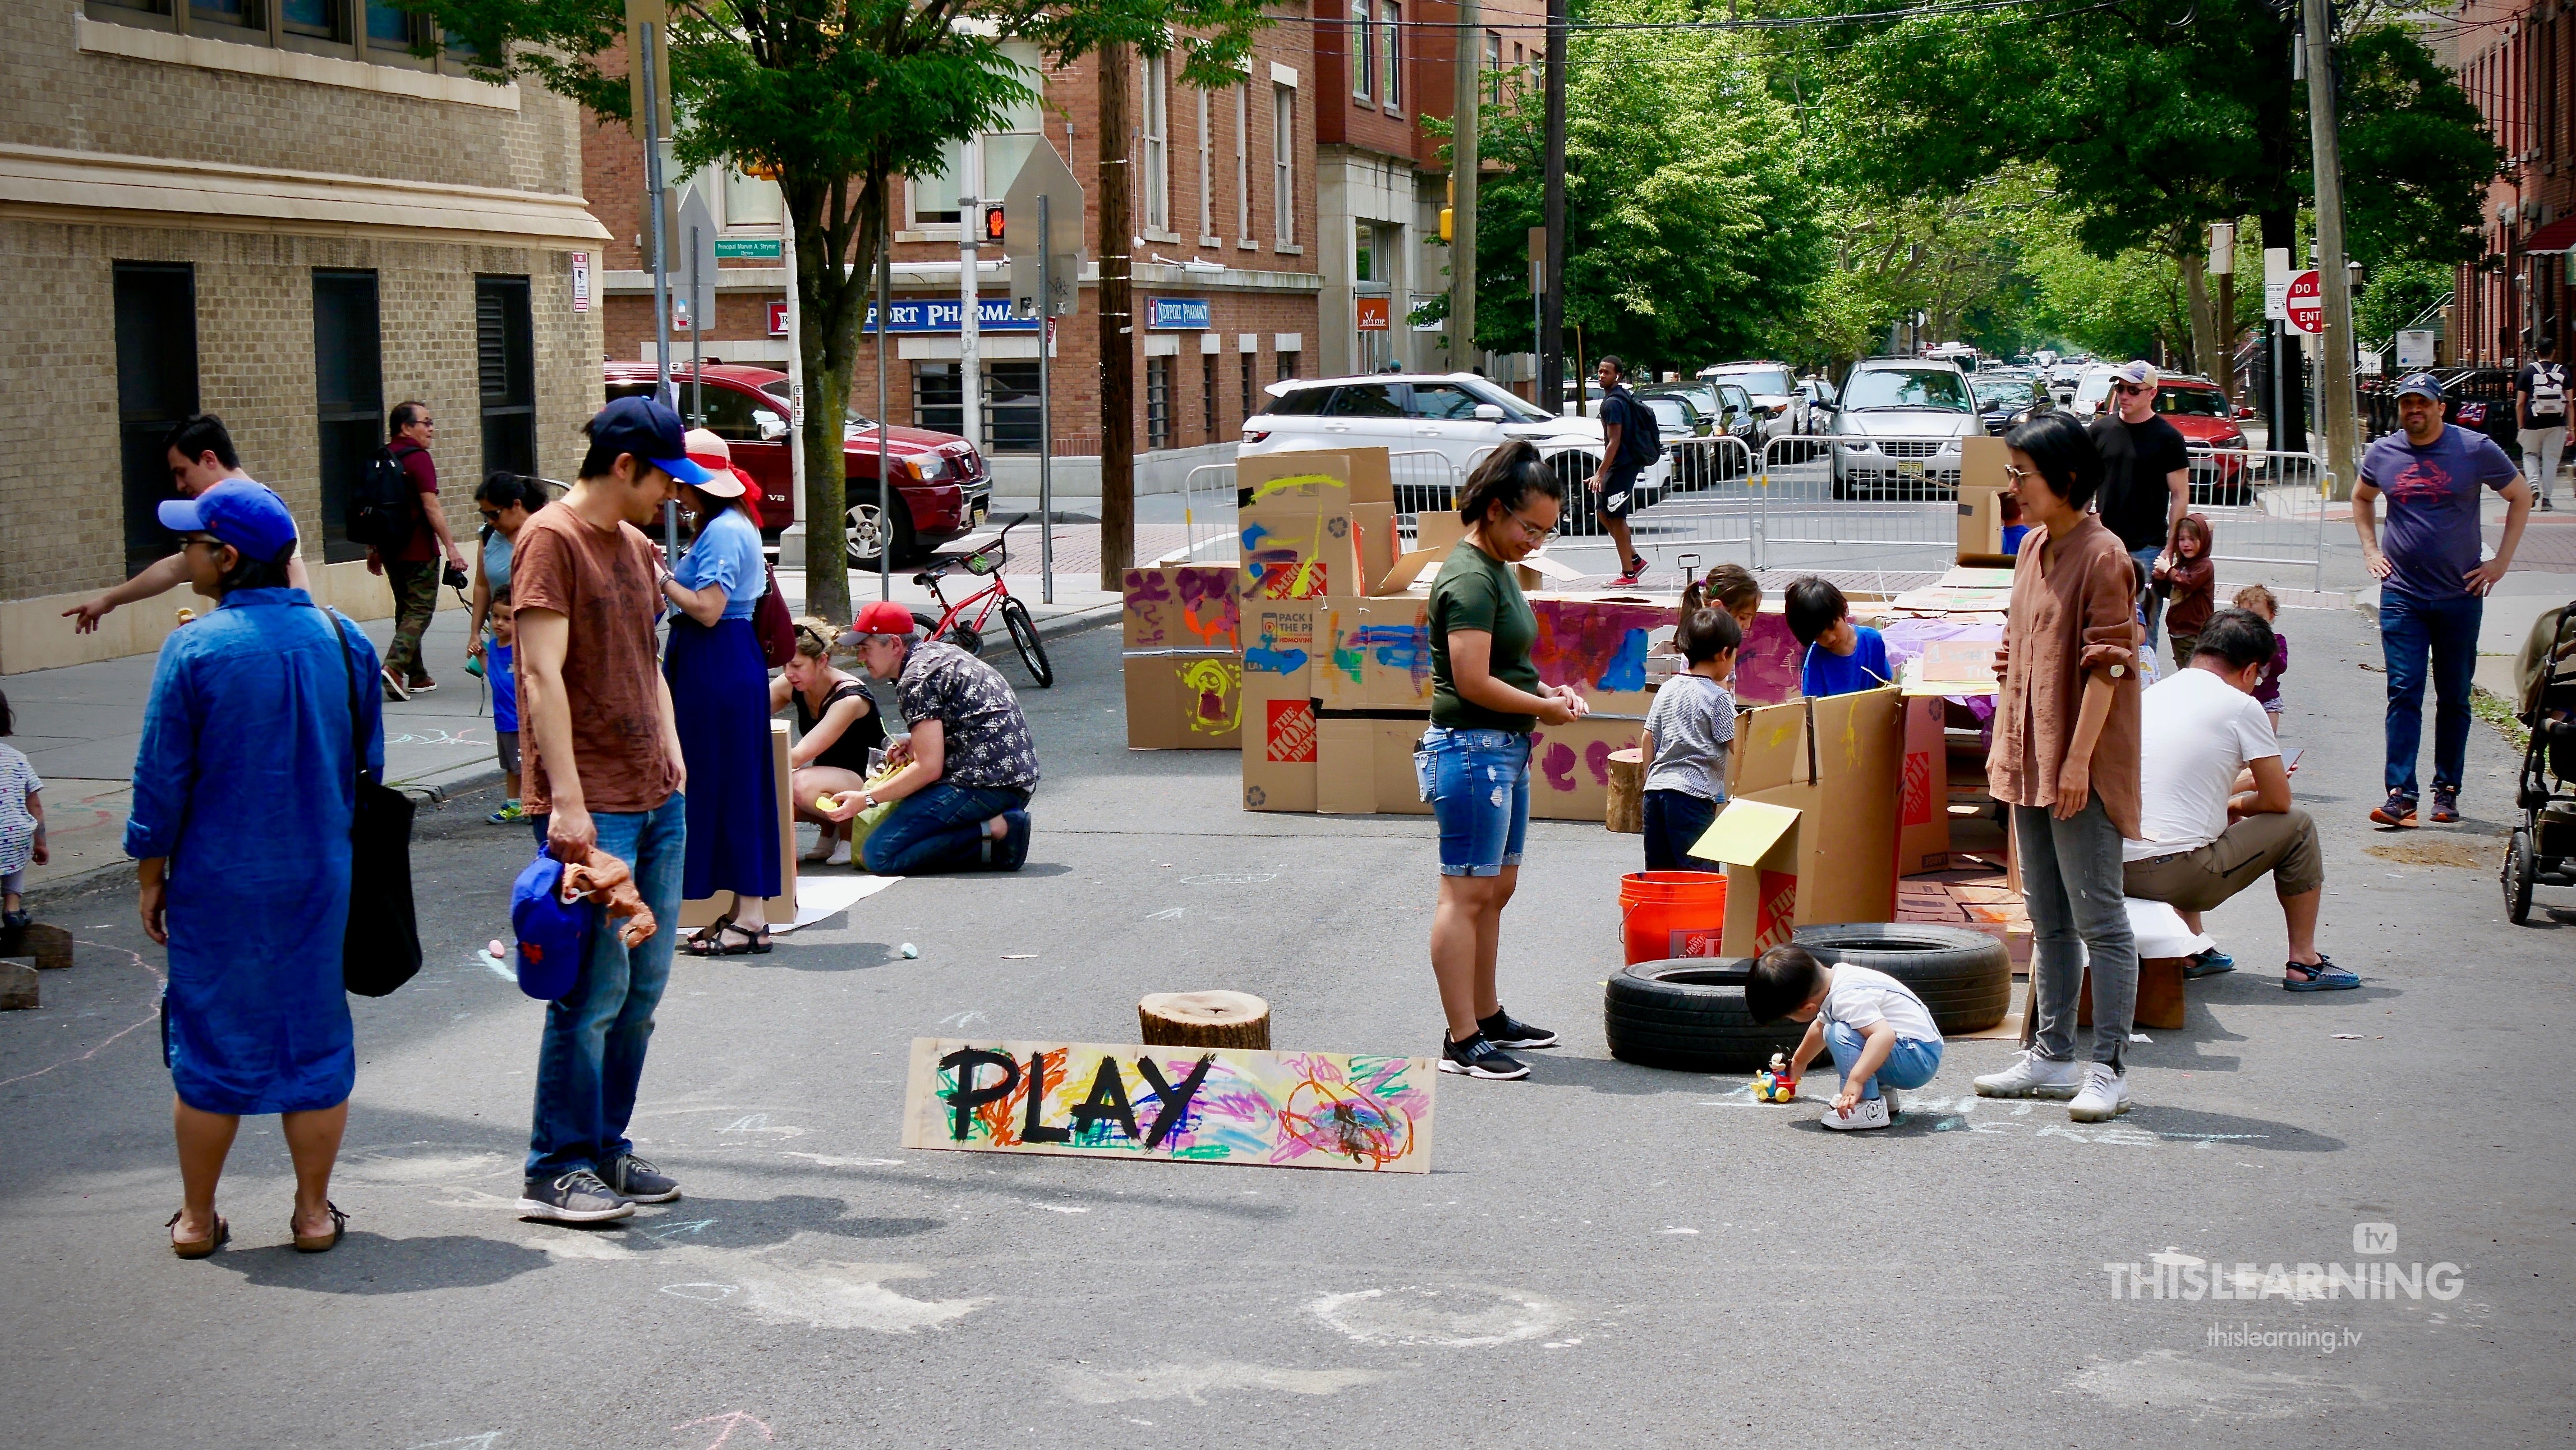 Scandi School Puts Creative Learning In Action (Block Party 2019)